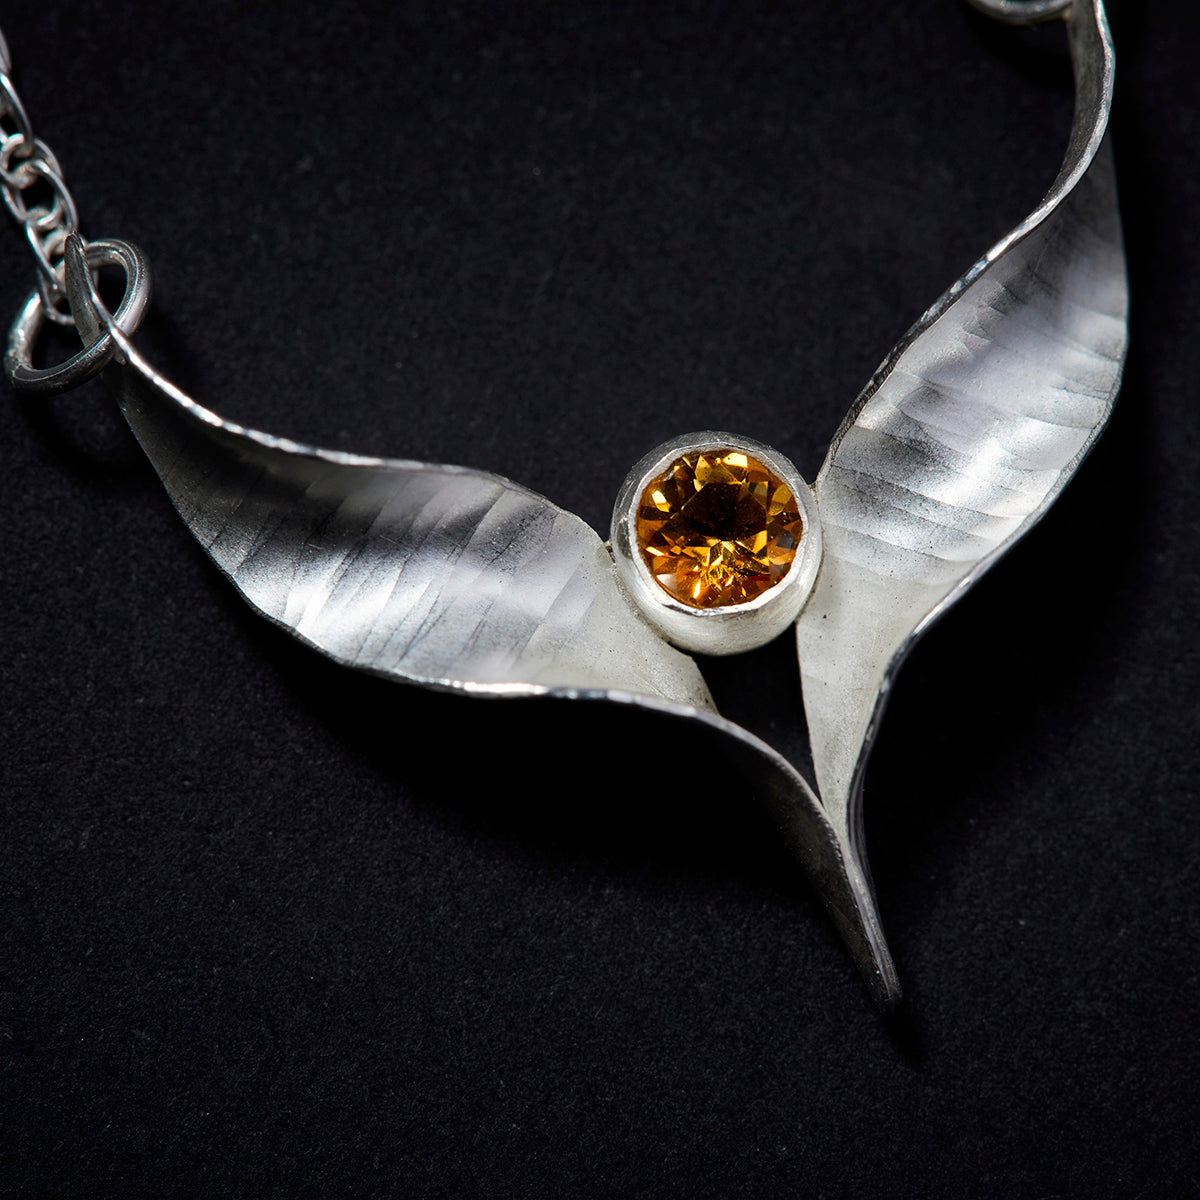 A silver bird necklace made from two mirror-image twisted and curled units soldered at the lower point and attached to a silver rope chain by a silver jump ring at each outer point. A sparkling yellow citrine is set in a length of silver tube which sits above the lower point where the two units meet.